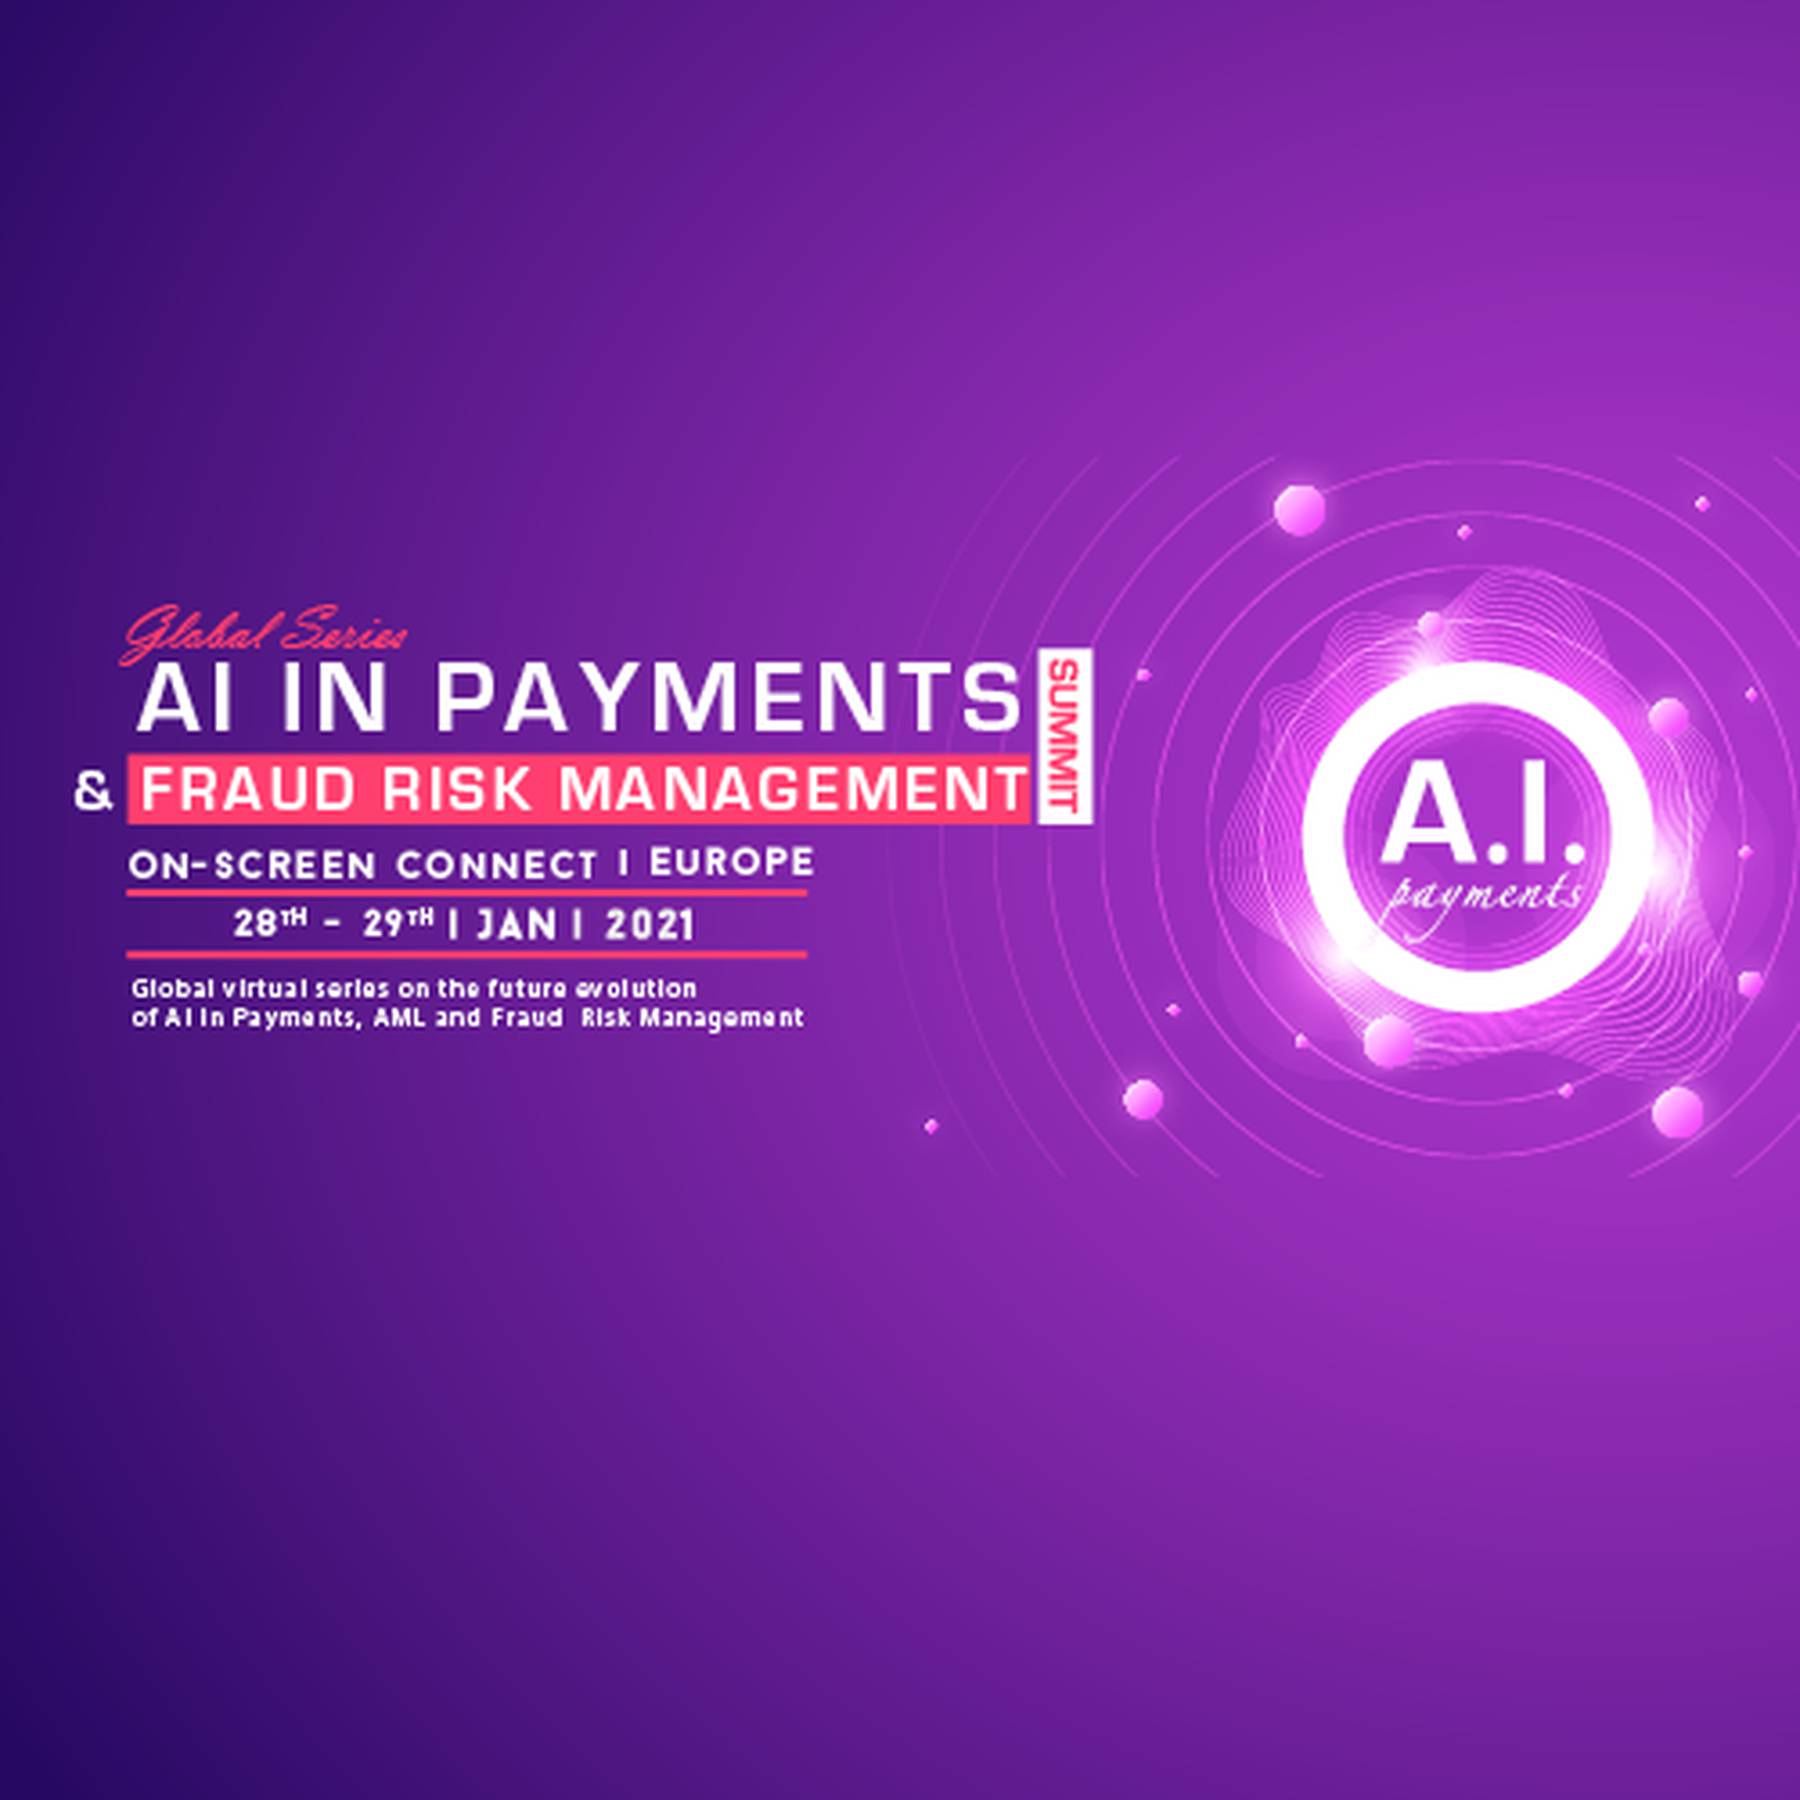 AI in Payments & Fraud Risk Management Summit Europe 2021